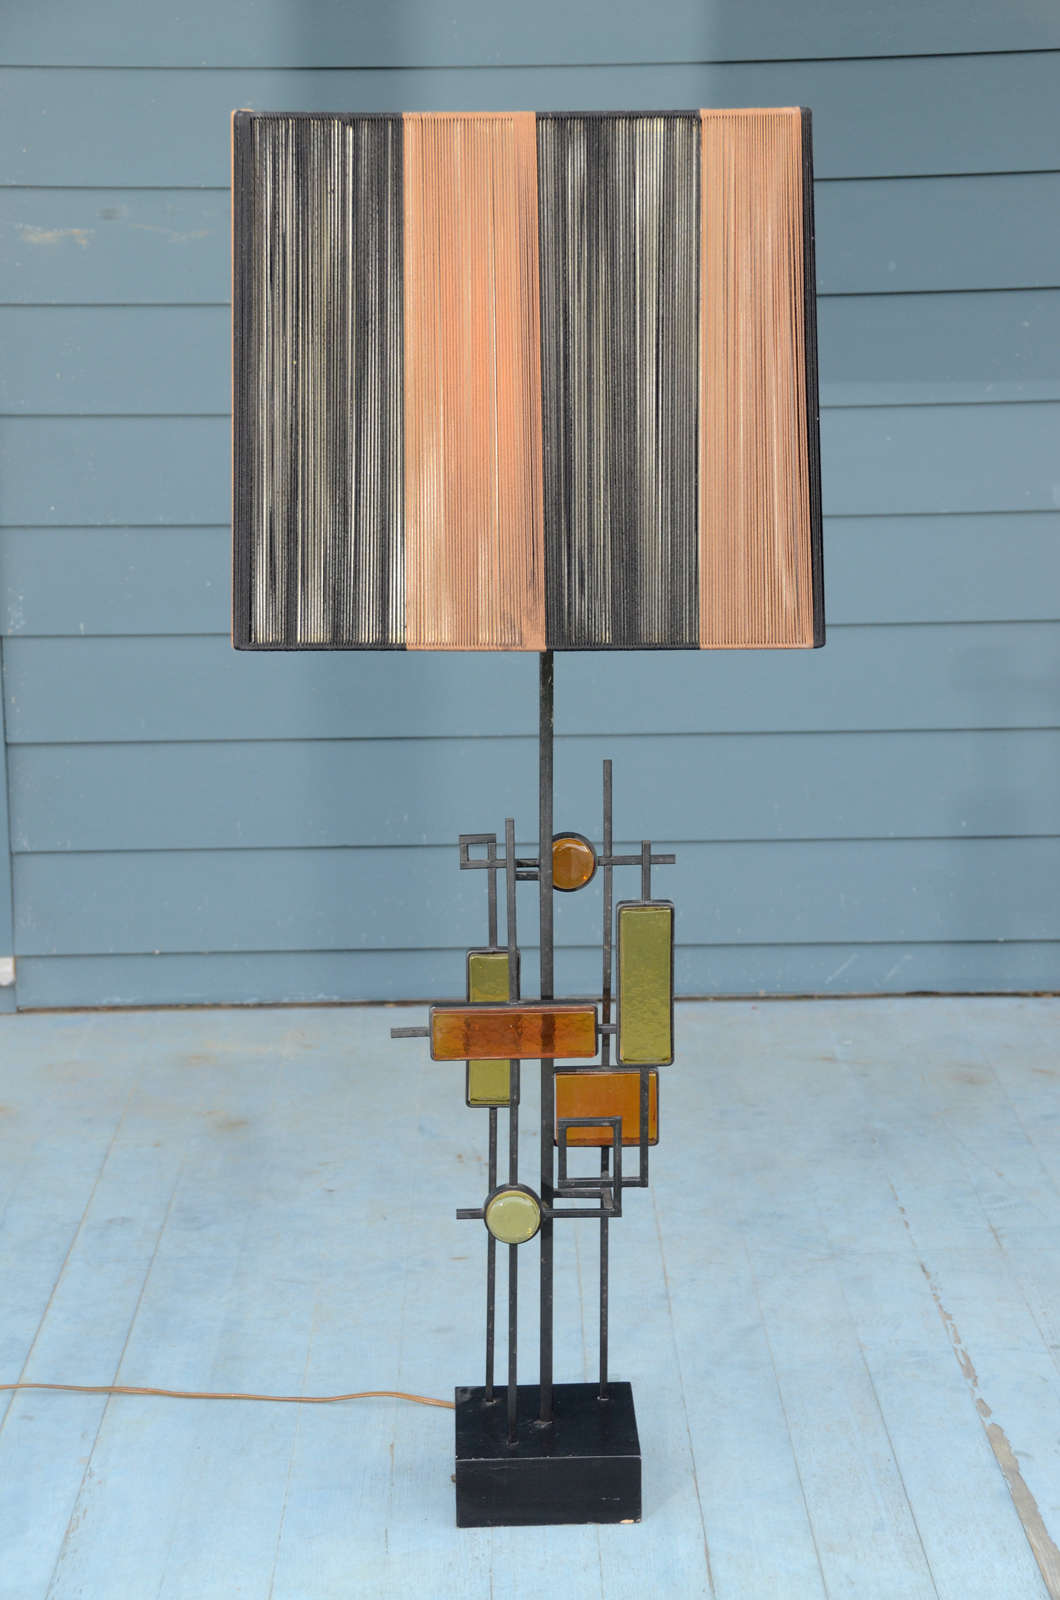 Danish 1960's Table Lamp, Wood Base supports Iron Shaft with Geometric Ornament & Yellow & Orange Glass Lozenges.  Danish, circa 1960.  Retains early Cord Lampshade.  Designed by Svend Aage Holm Sorenson.